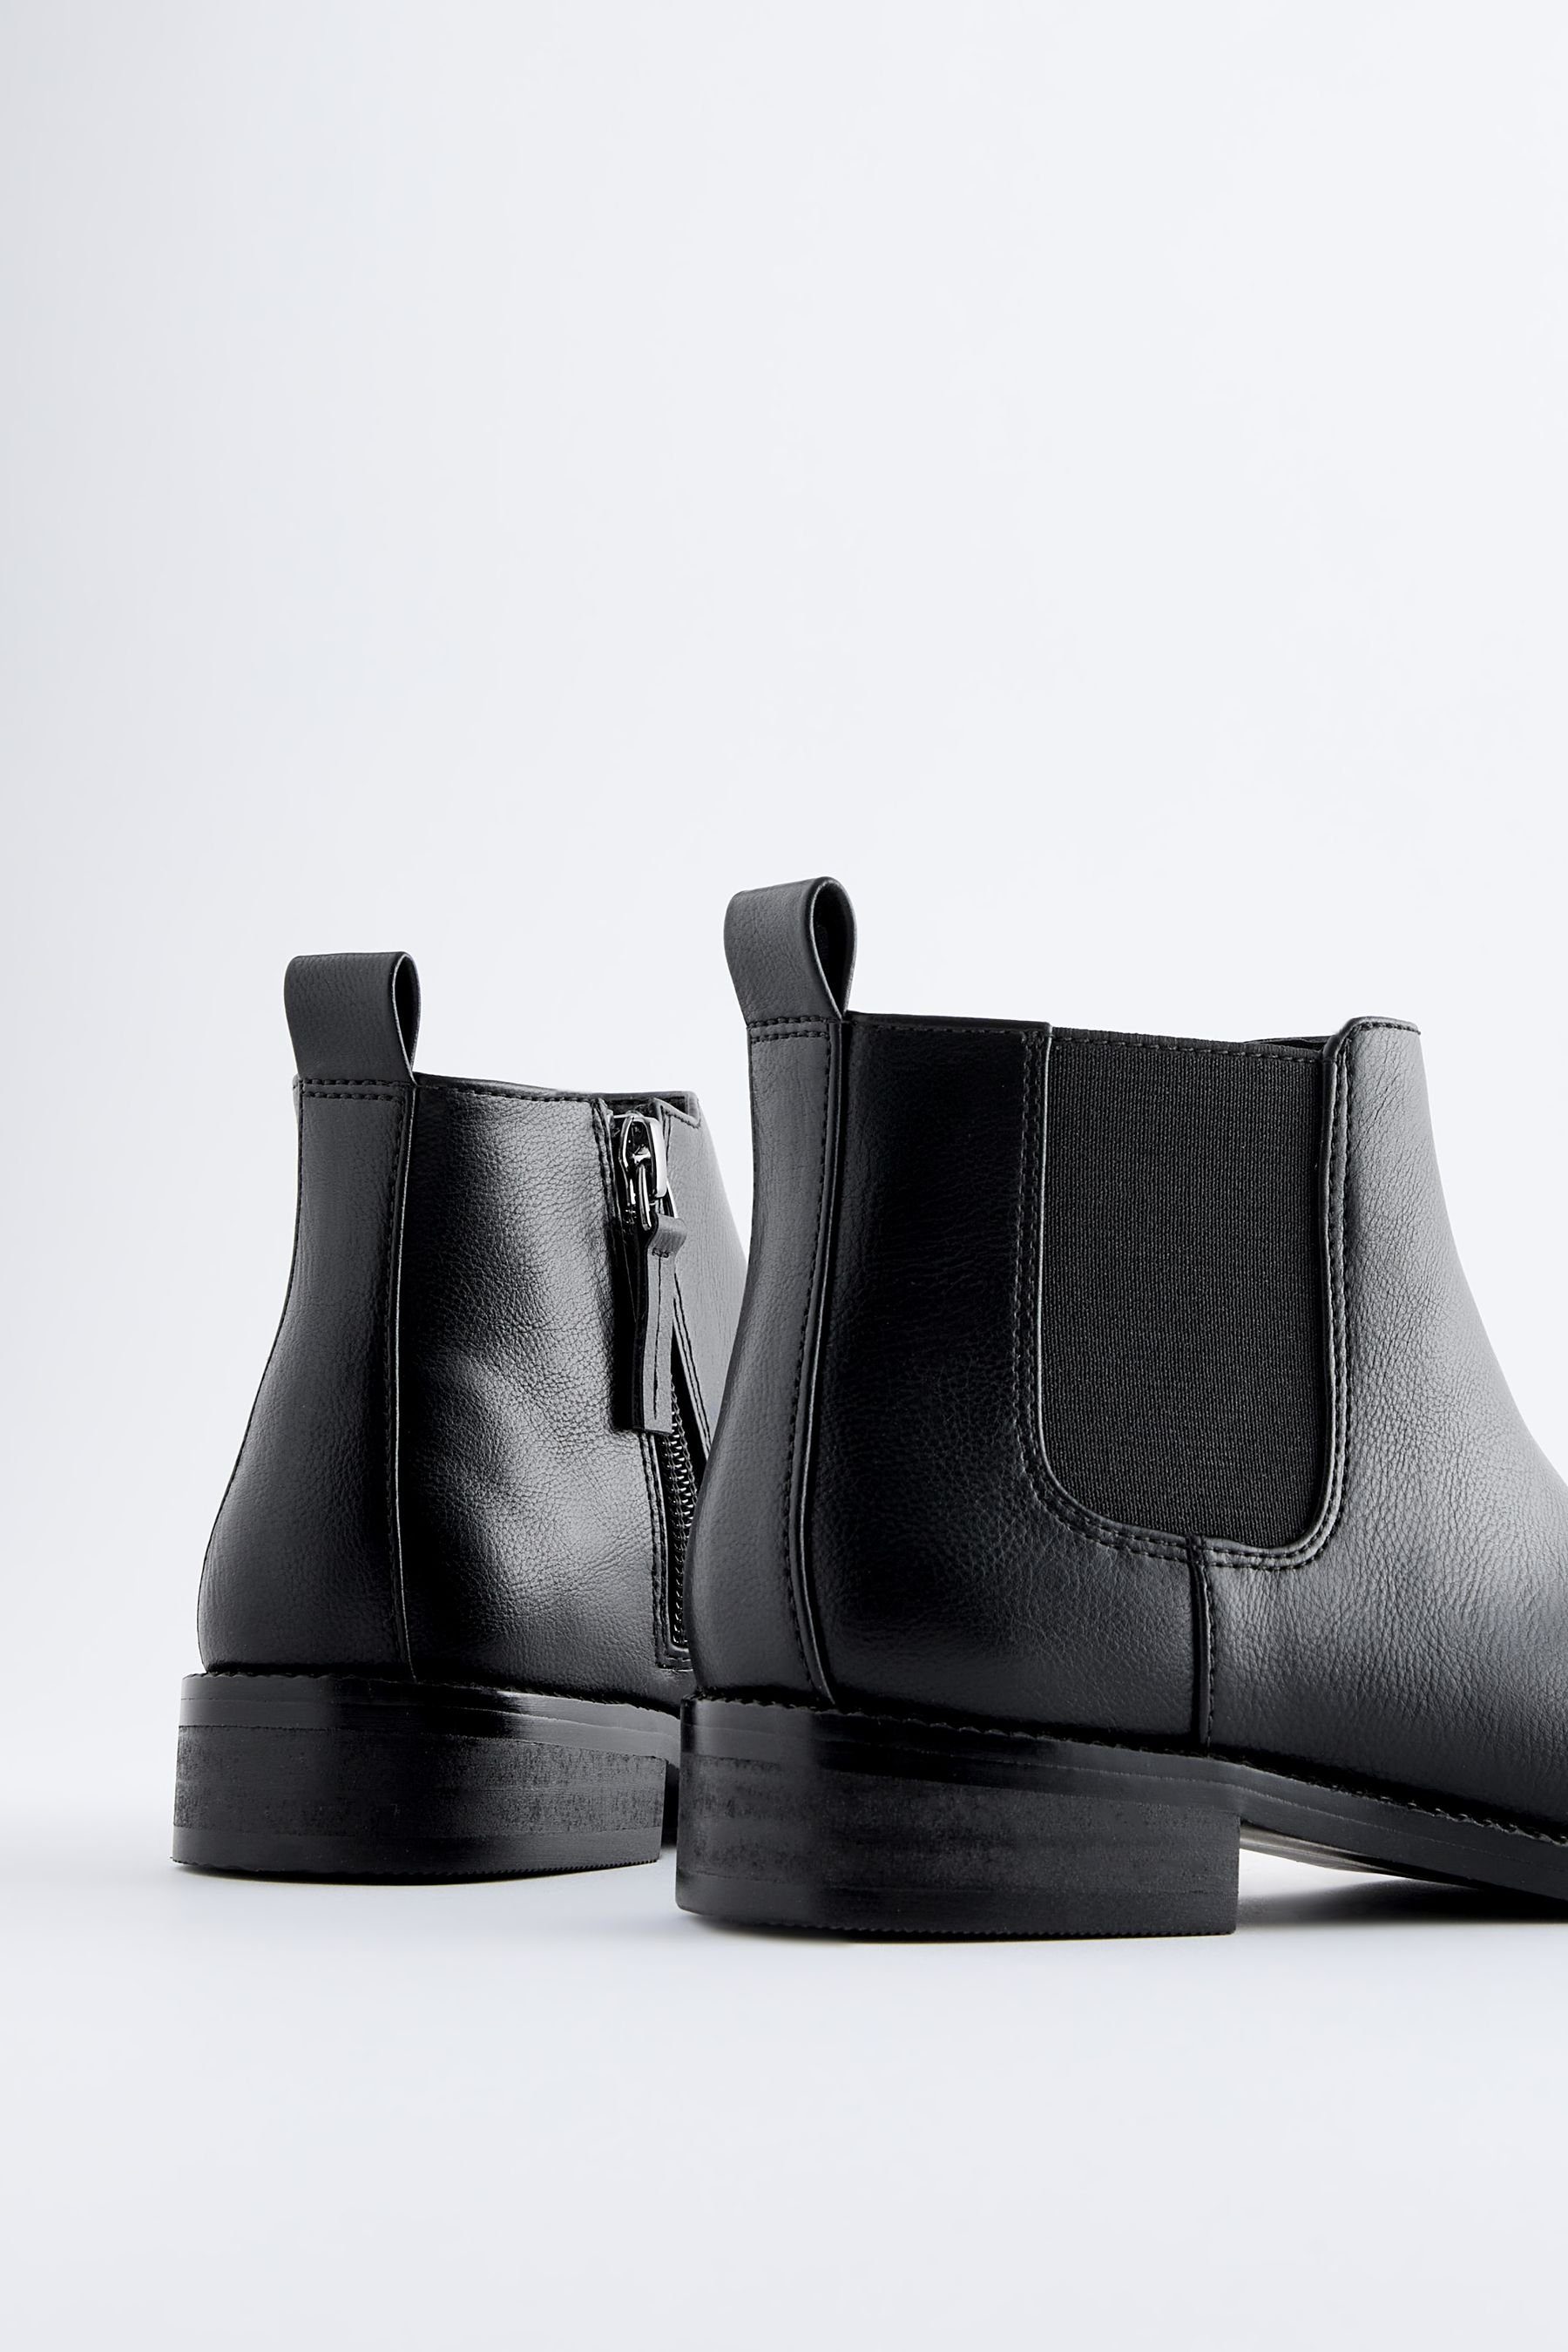 Niedrige (1-tlg) Chelseaboots Next Chelsea-Boots